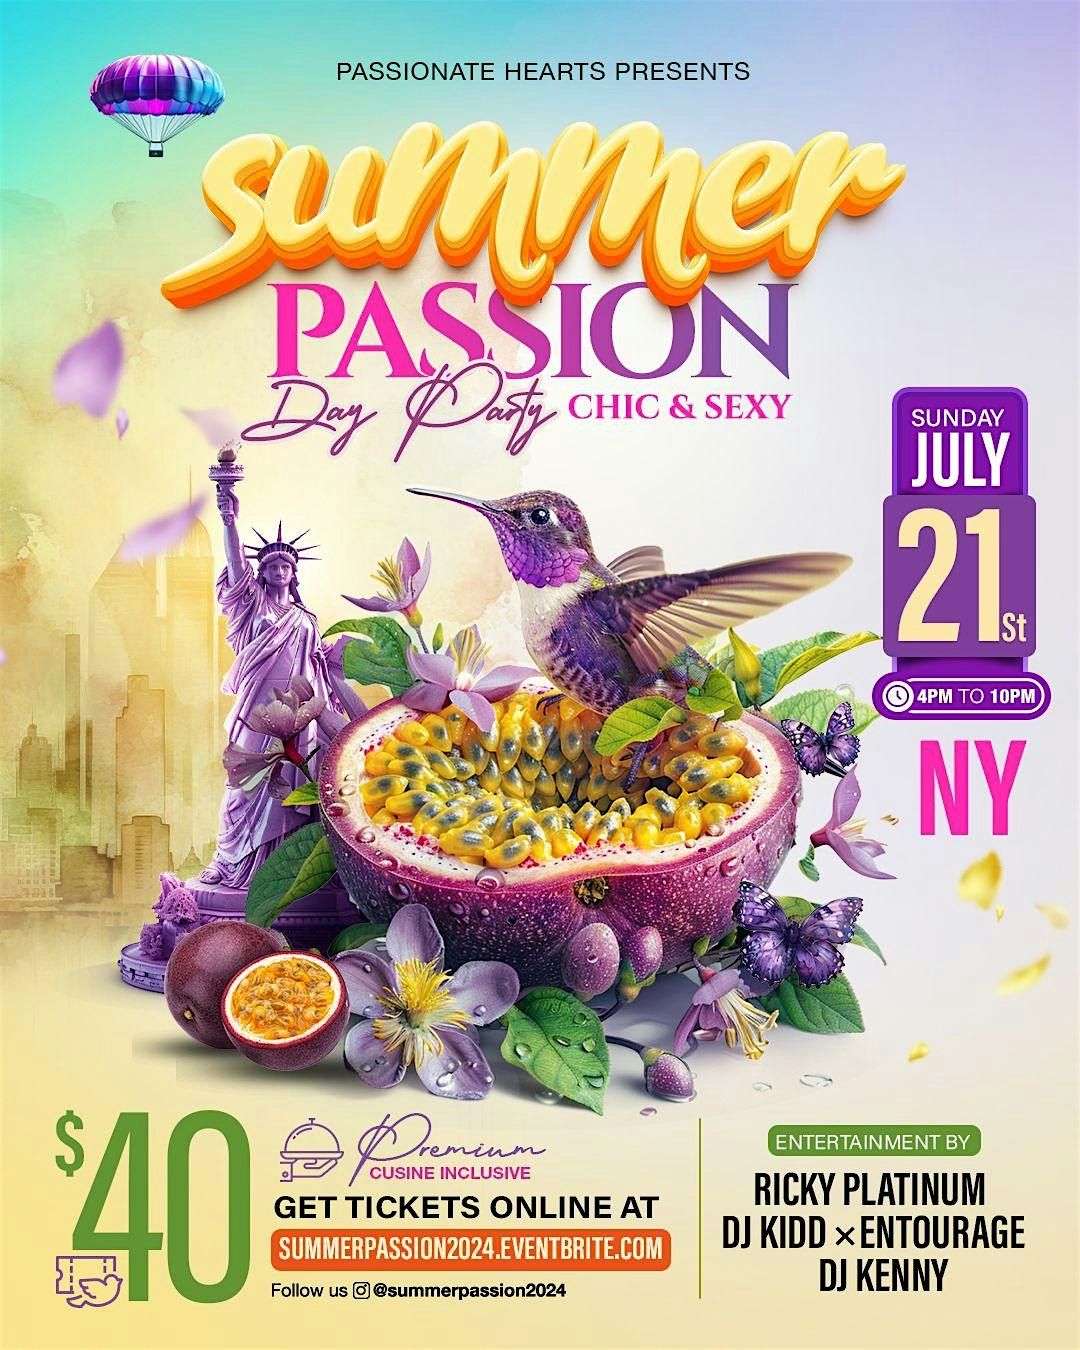 SUMMER PASSION DAY PARTY